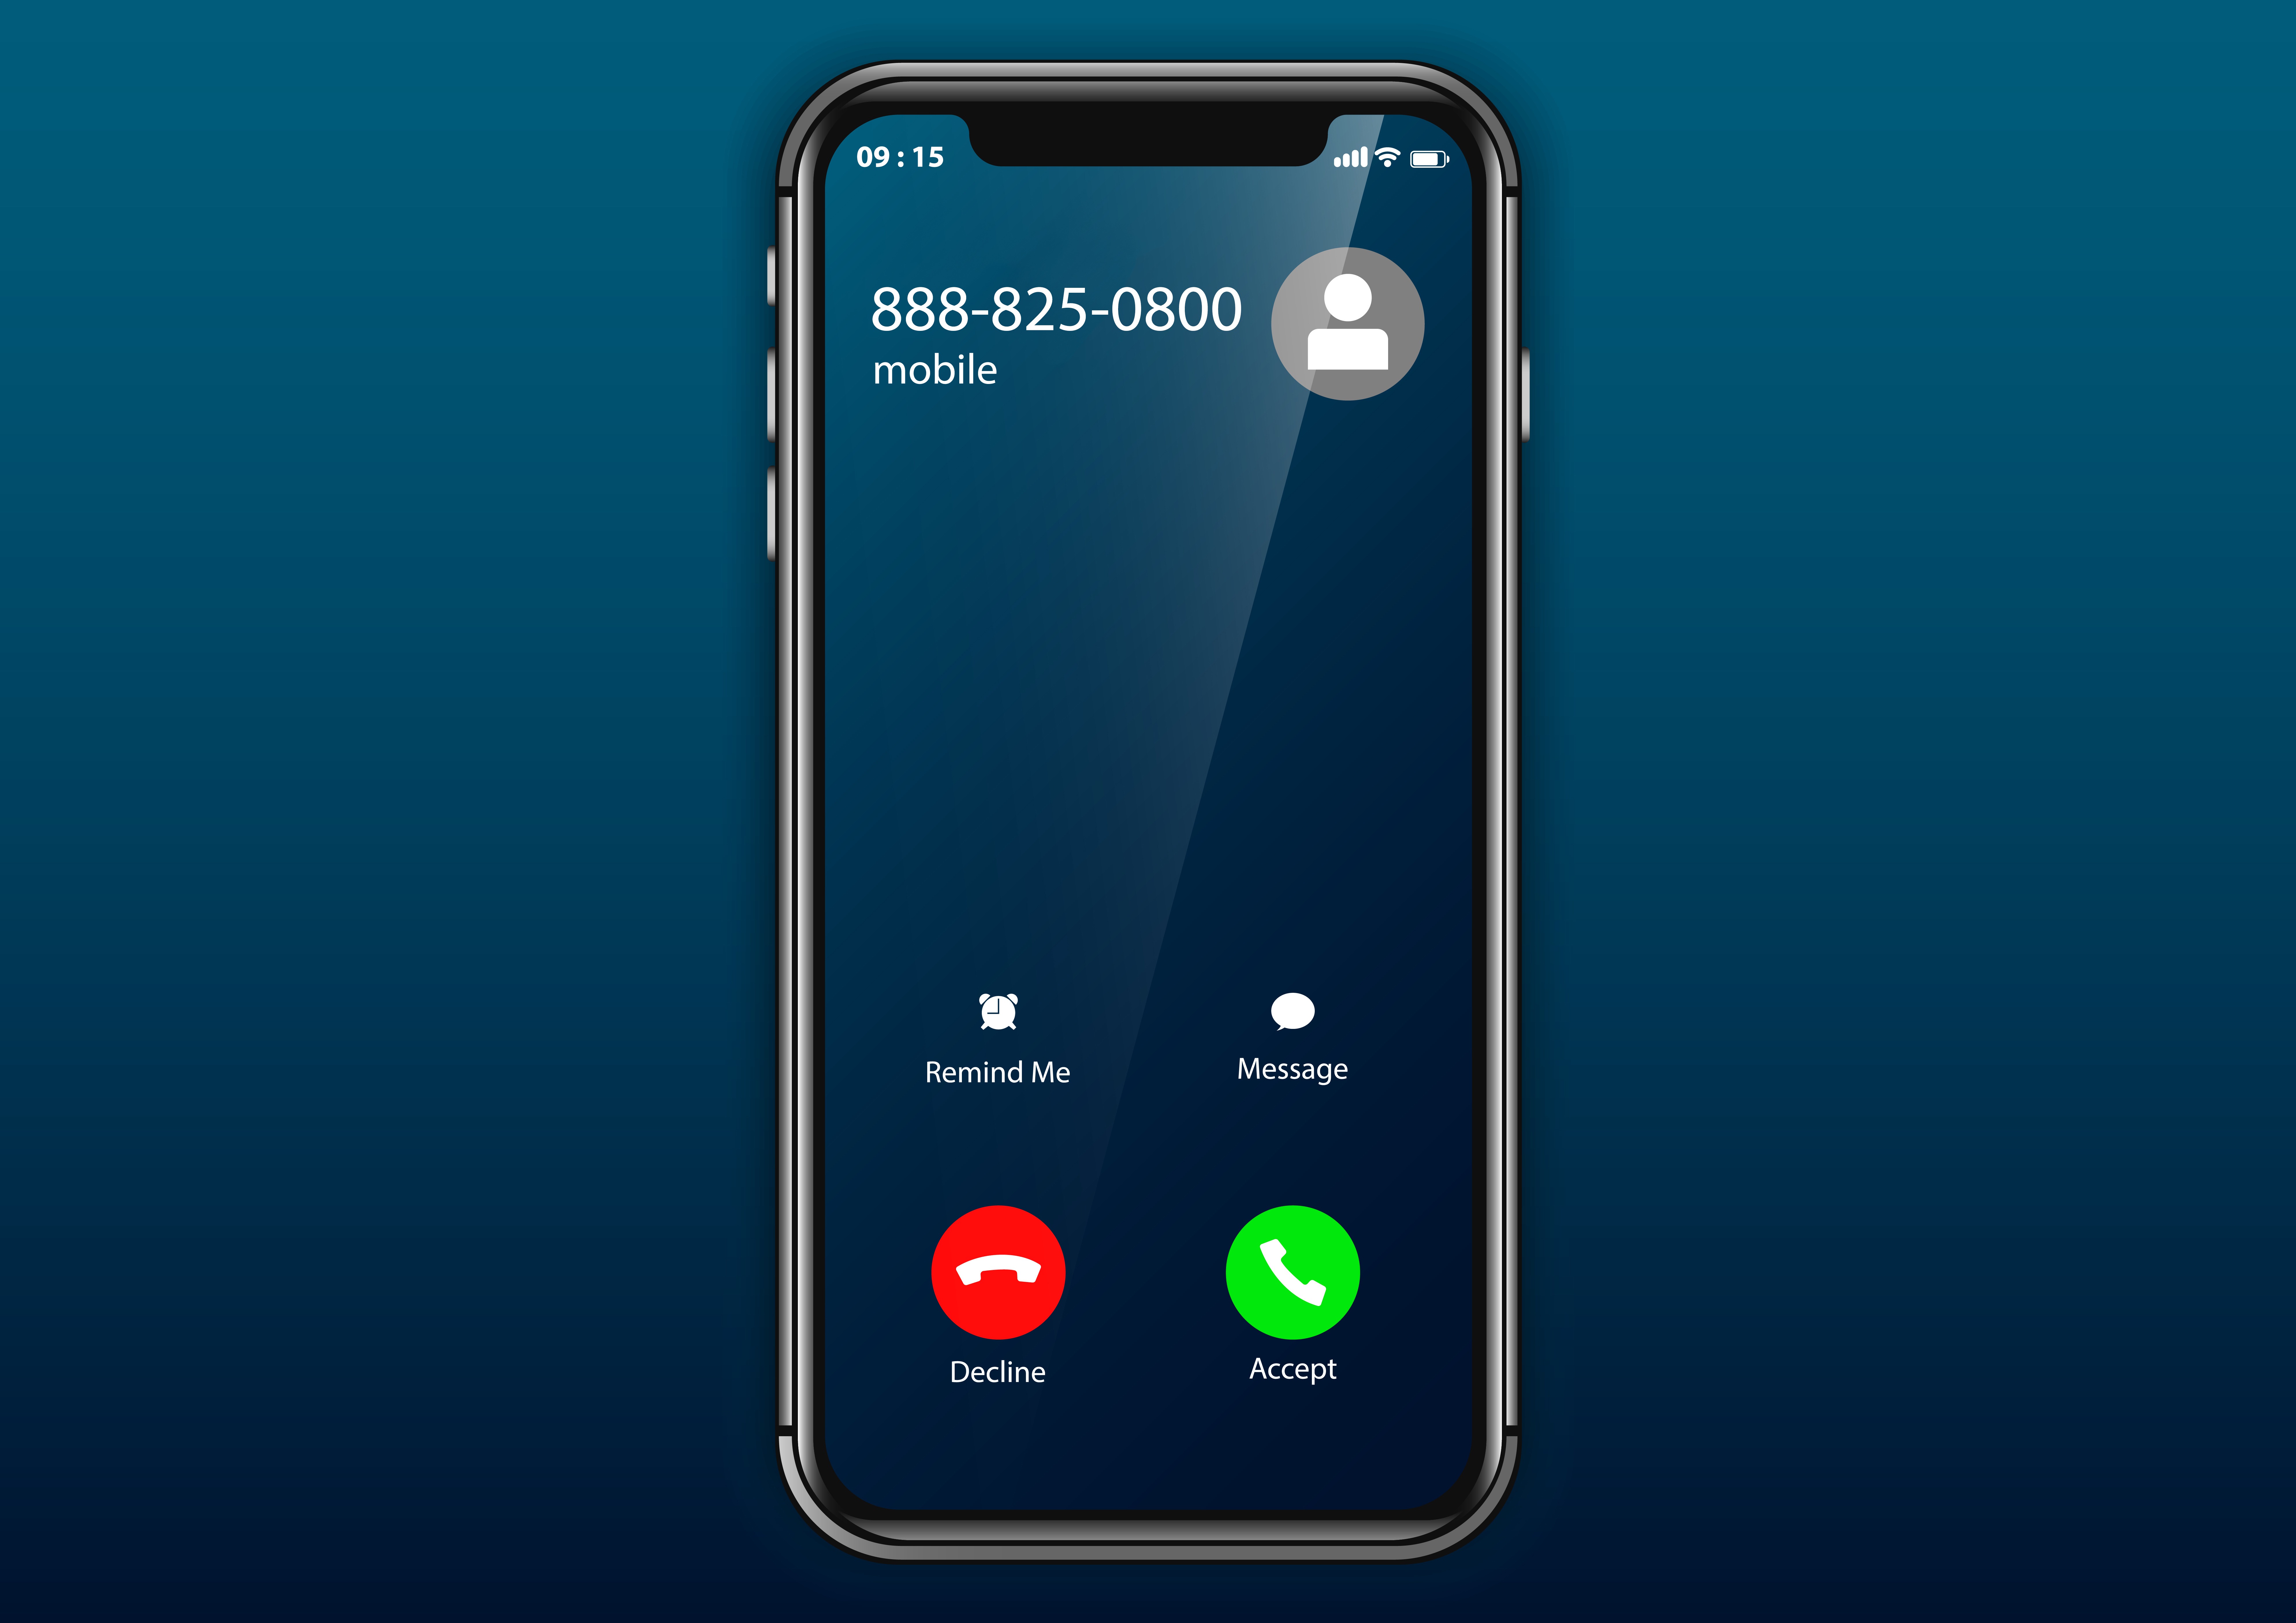 Inbound Call on Mobile Phone - Having a Work Phone Number Can Help Your Business Grow